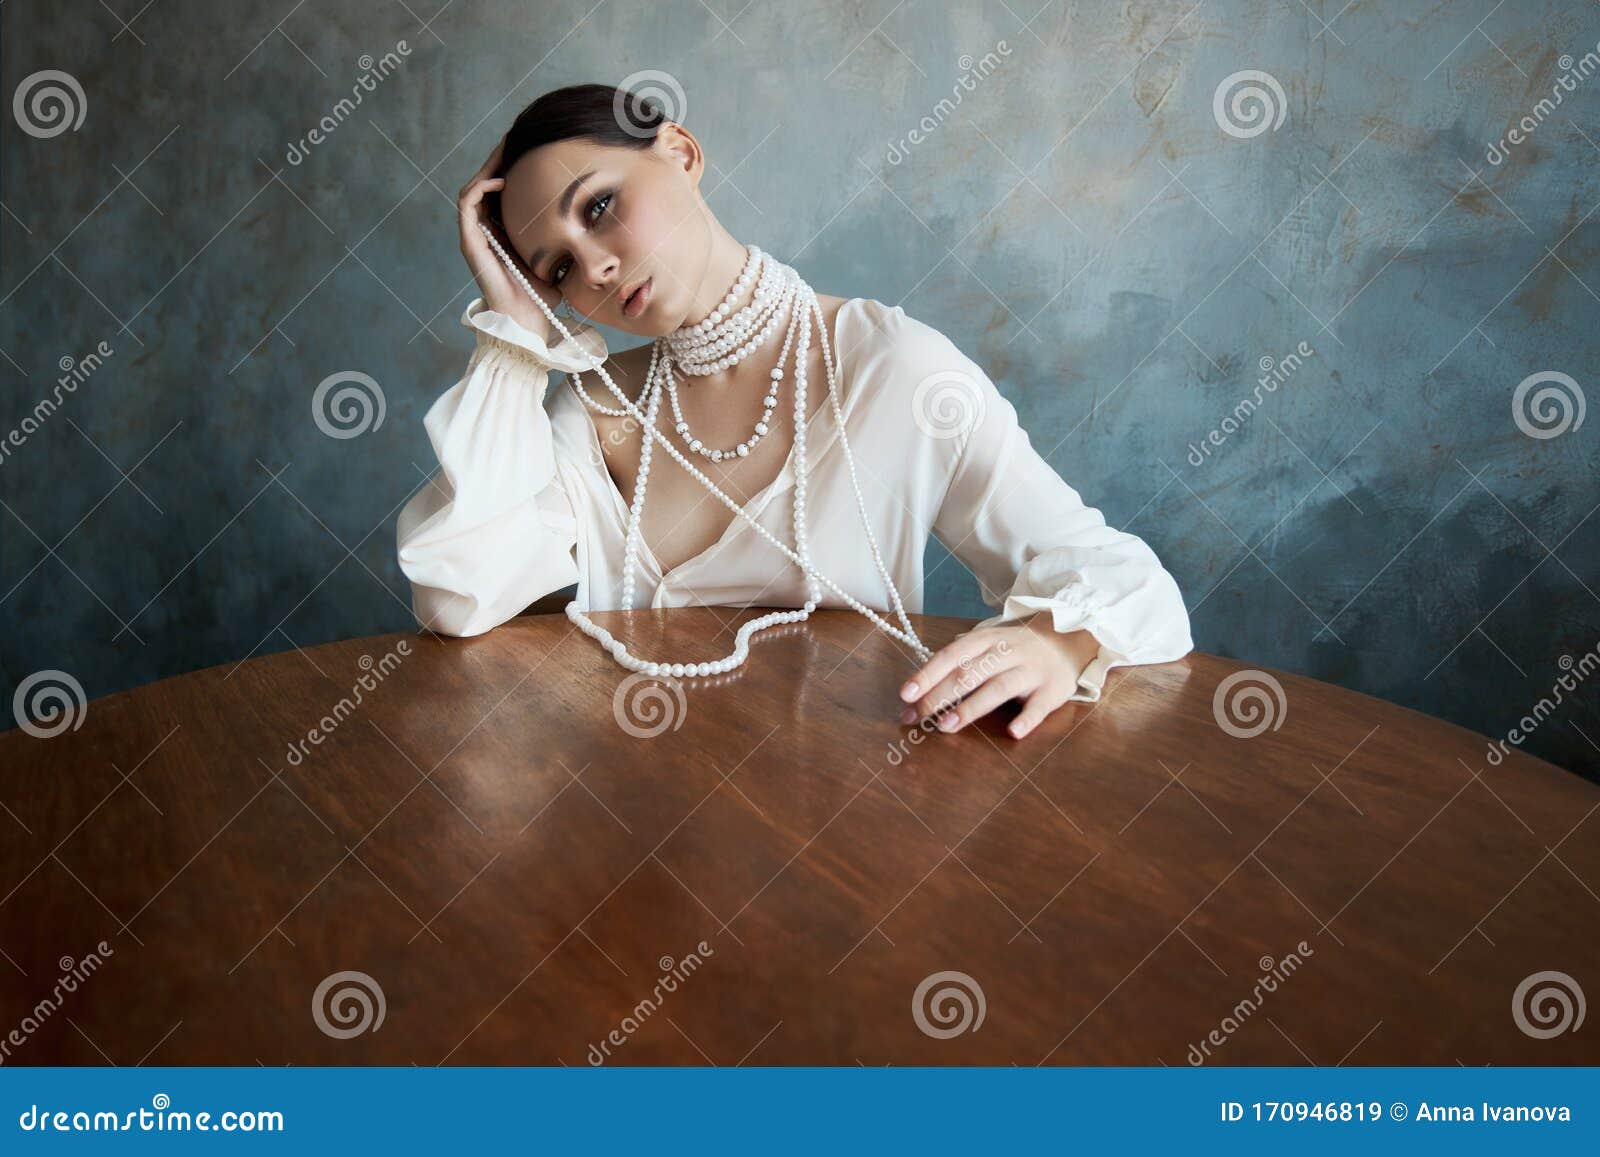 Girl Dressed In White Boho Clothing With White Pearl Beads ...